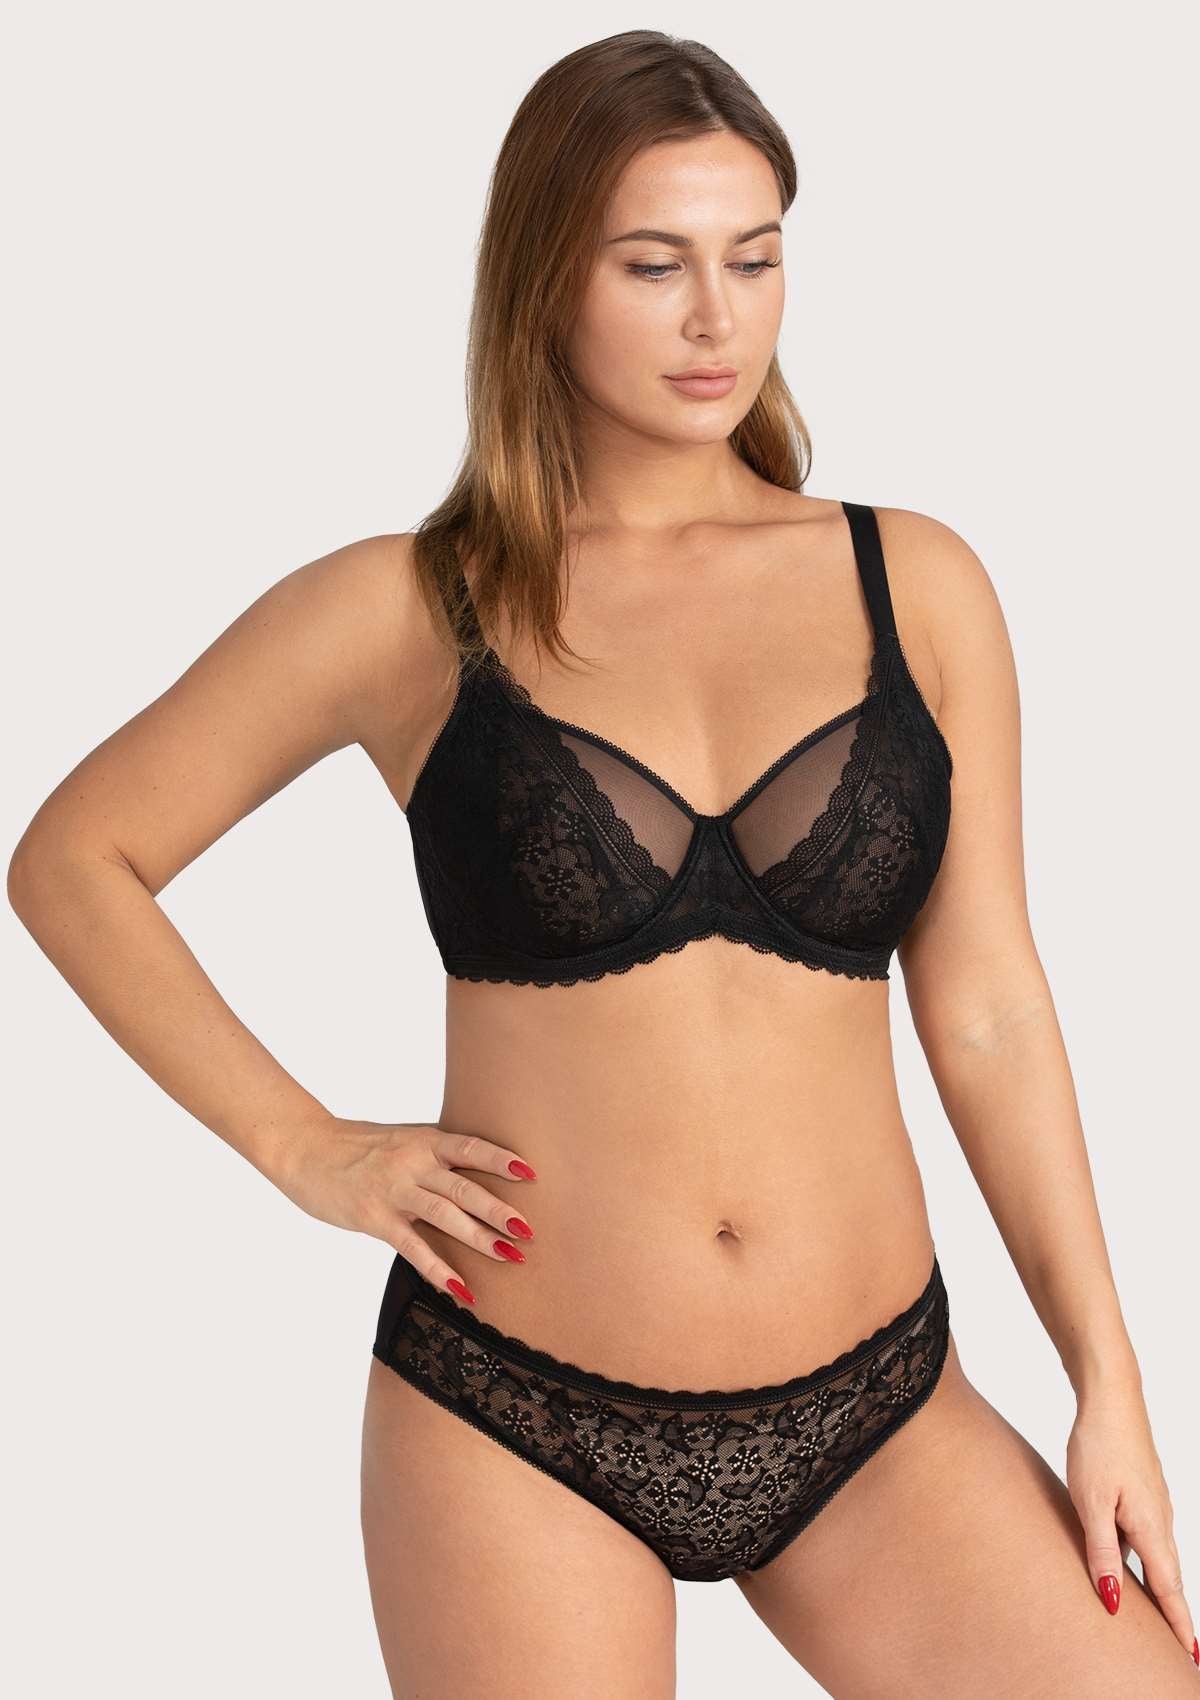 HSIA Anemone Lace Bra And Panties: Back Support Wired Bra - Black / 40 / C